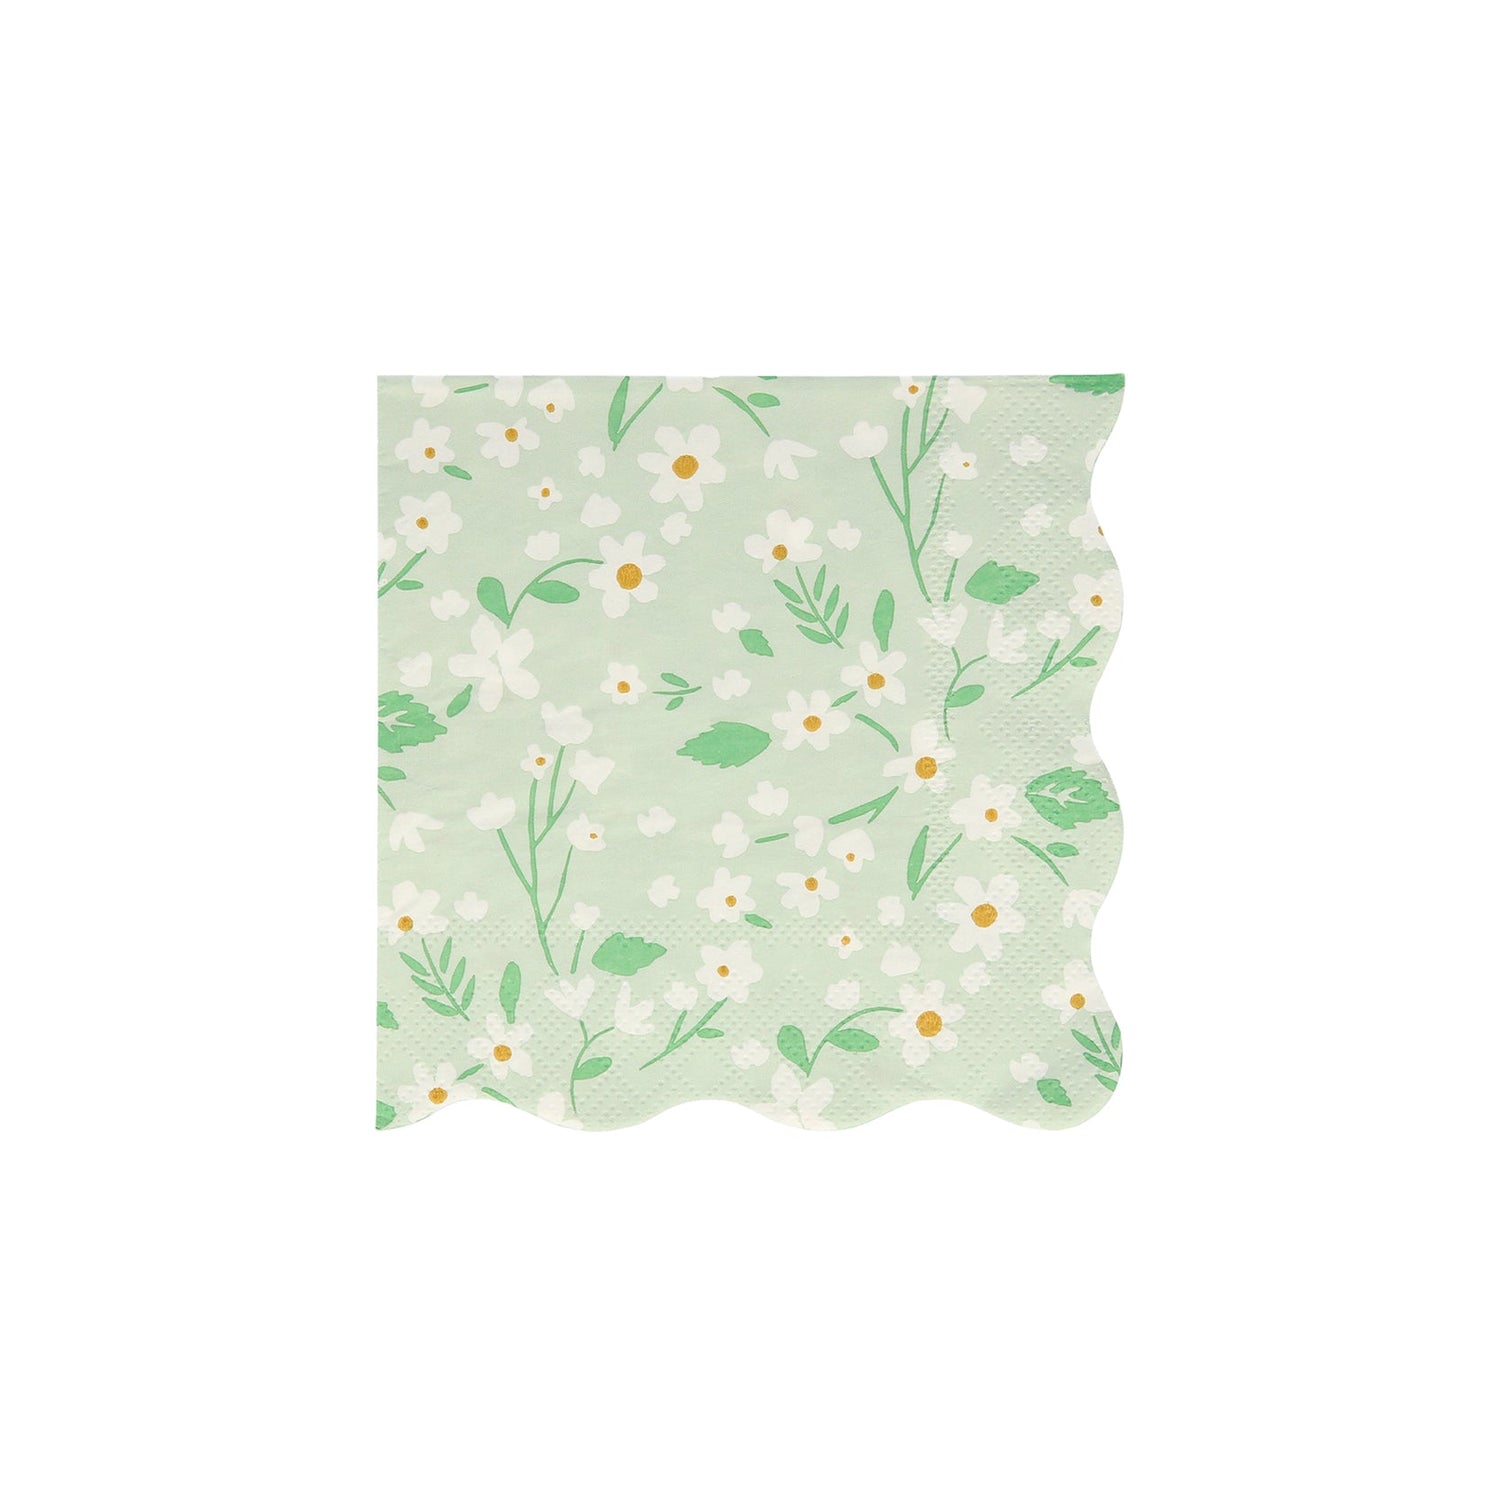 A green Ditsy Floral Napkins with a floral pattern by Meri Meri.